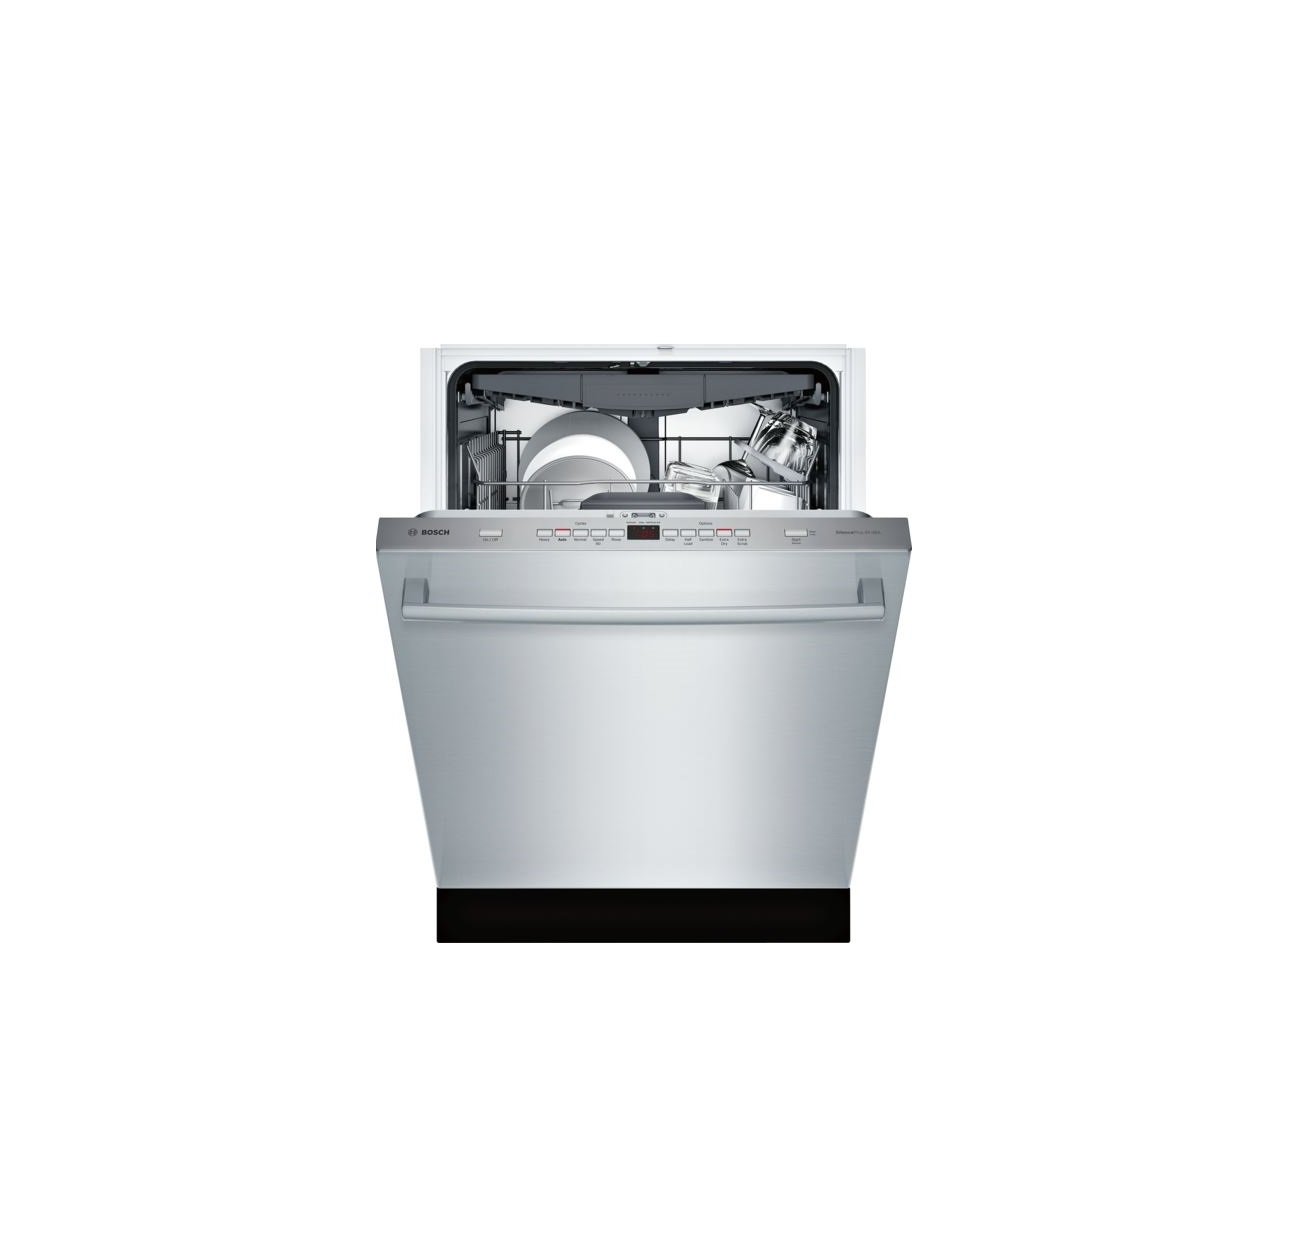 Bosch SHX863WD5N 300 Series Dishwasher 24'' Stainless steel User Manual - feature image